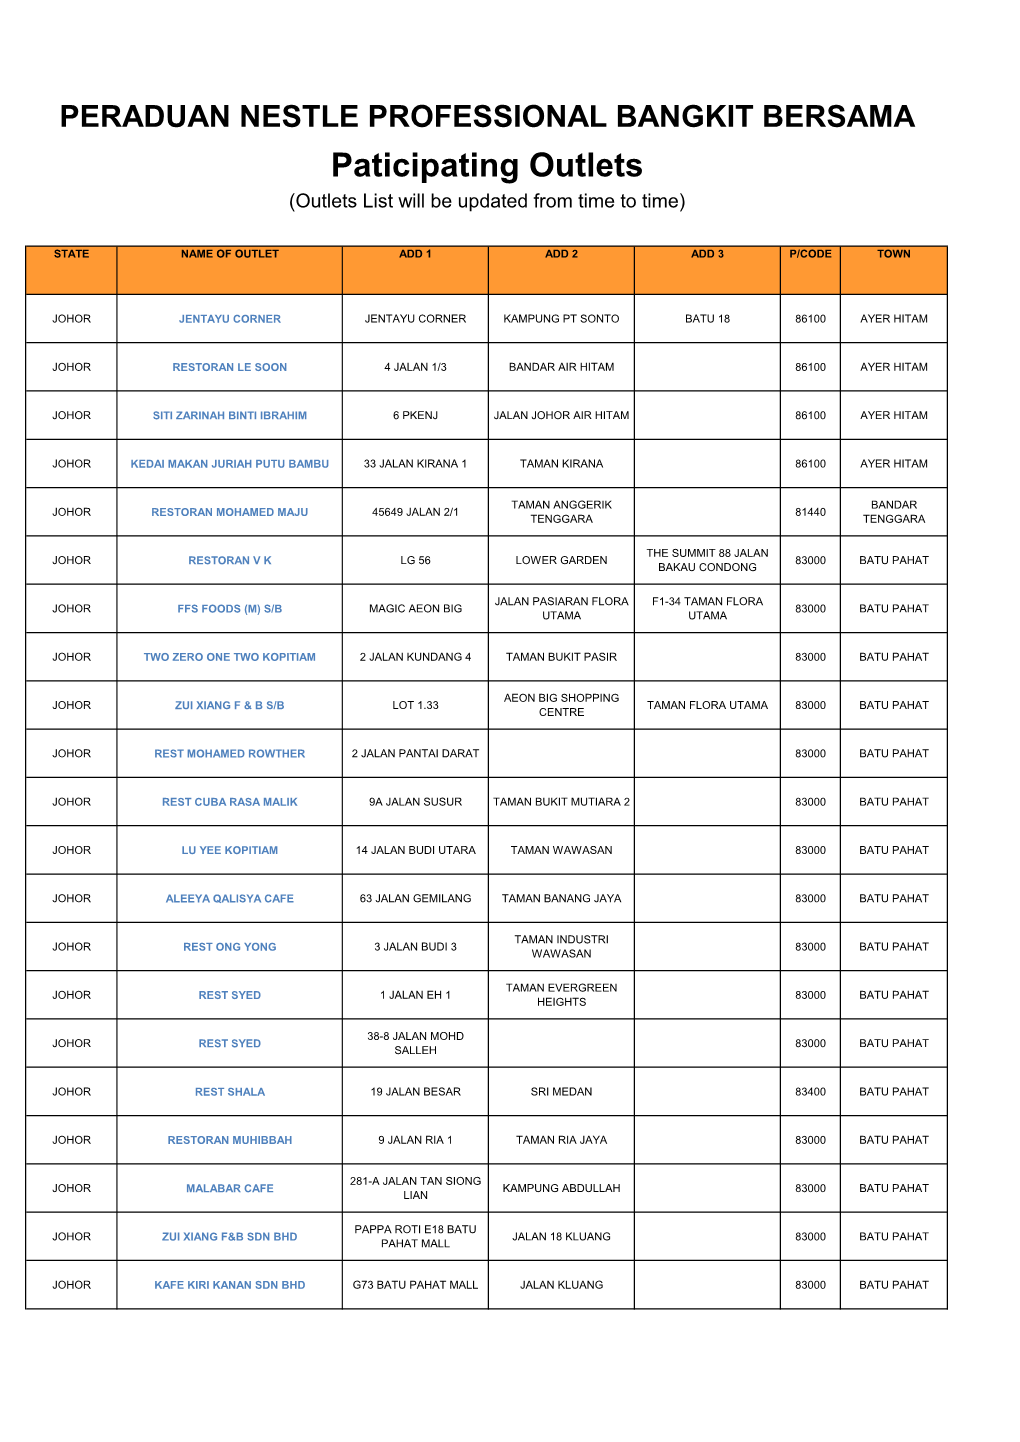 Paticipating Outlets (Outlets List Will Be Updated from Time to Time)